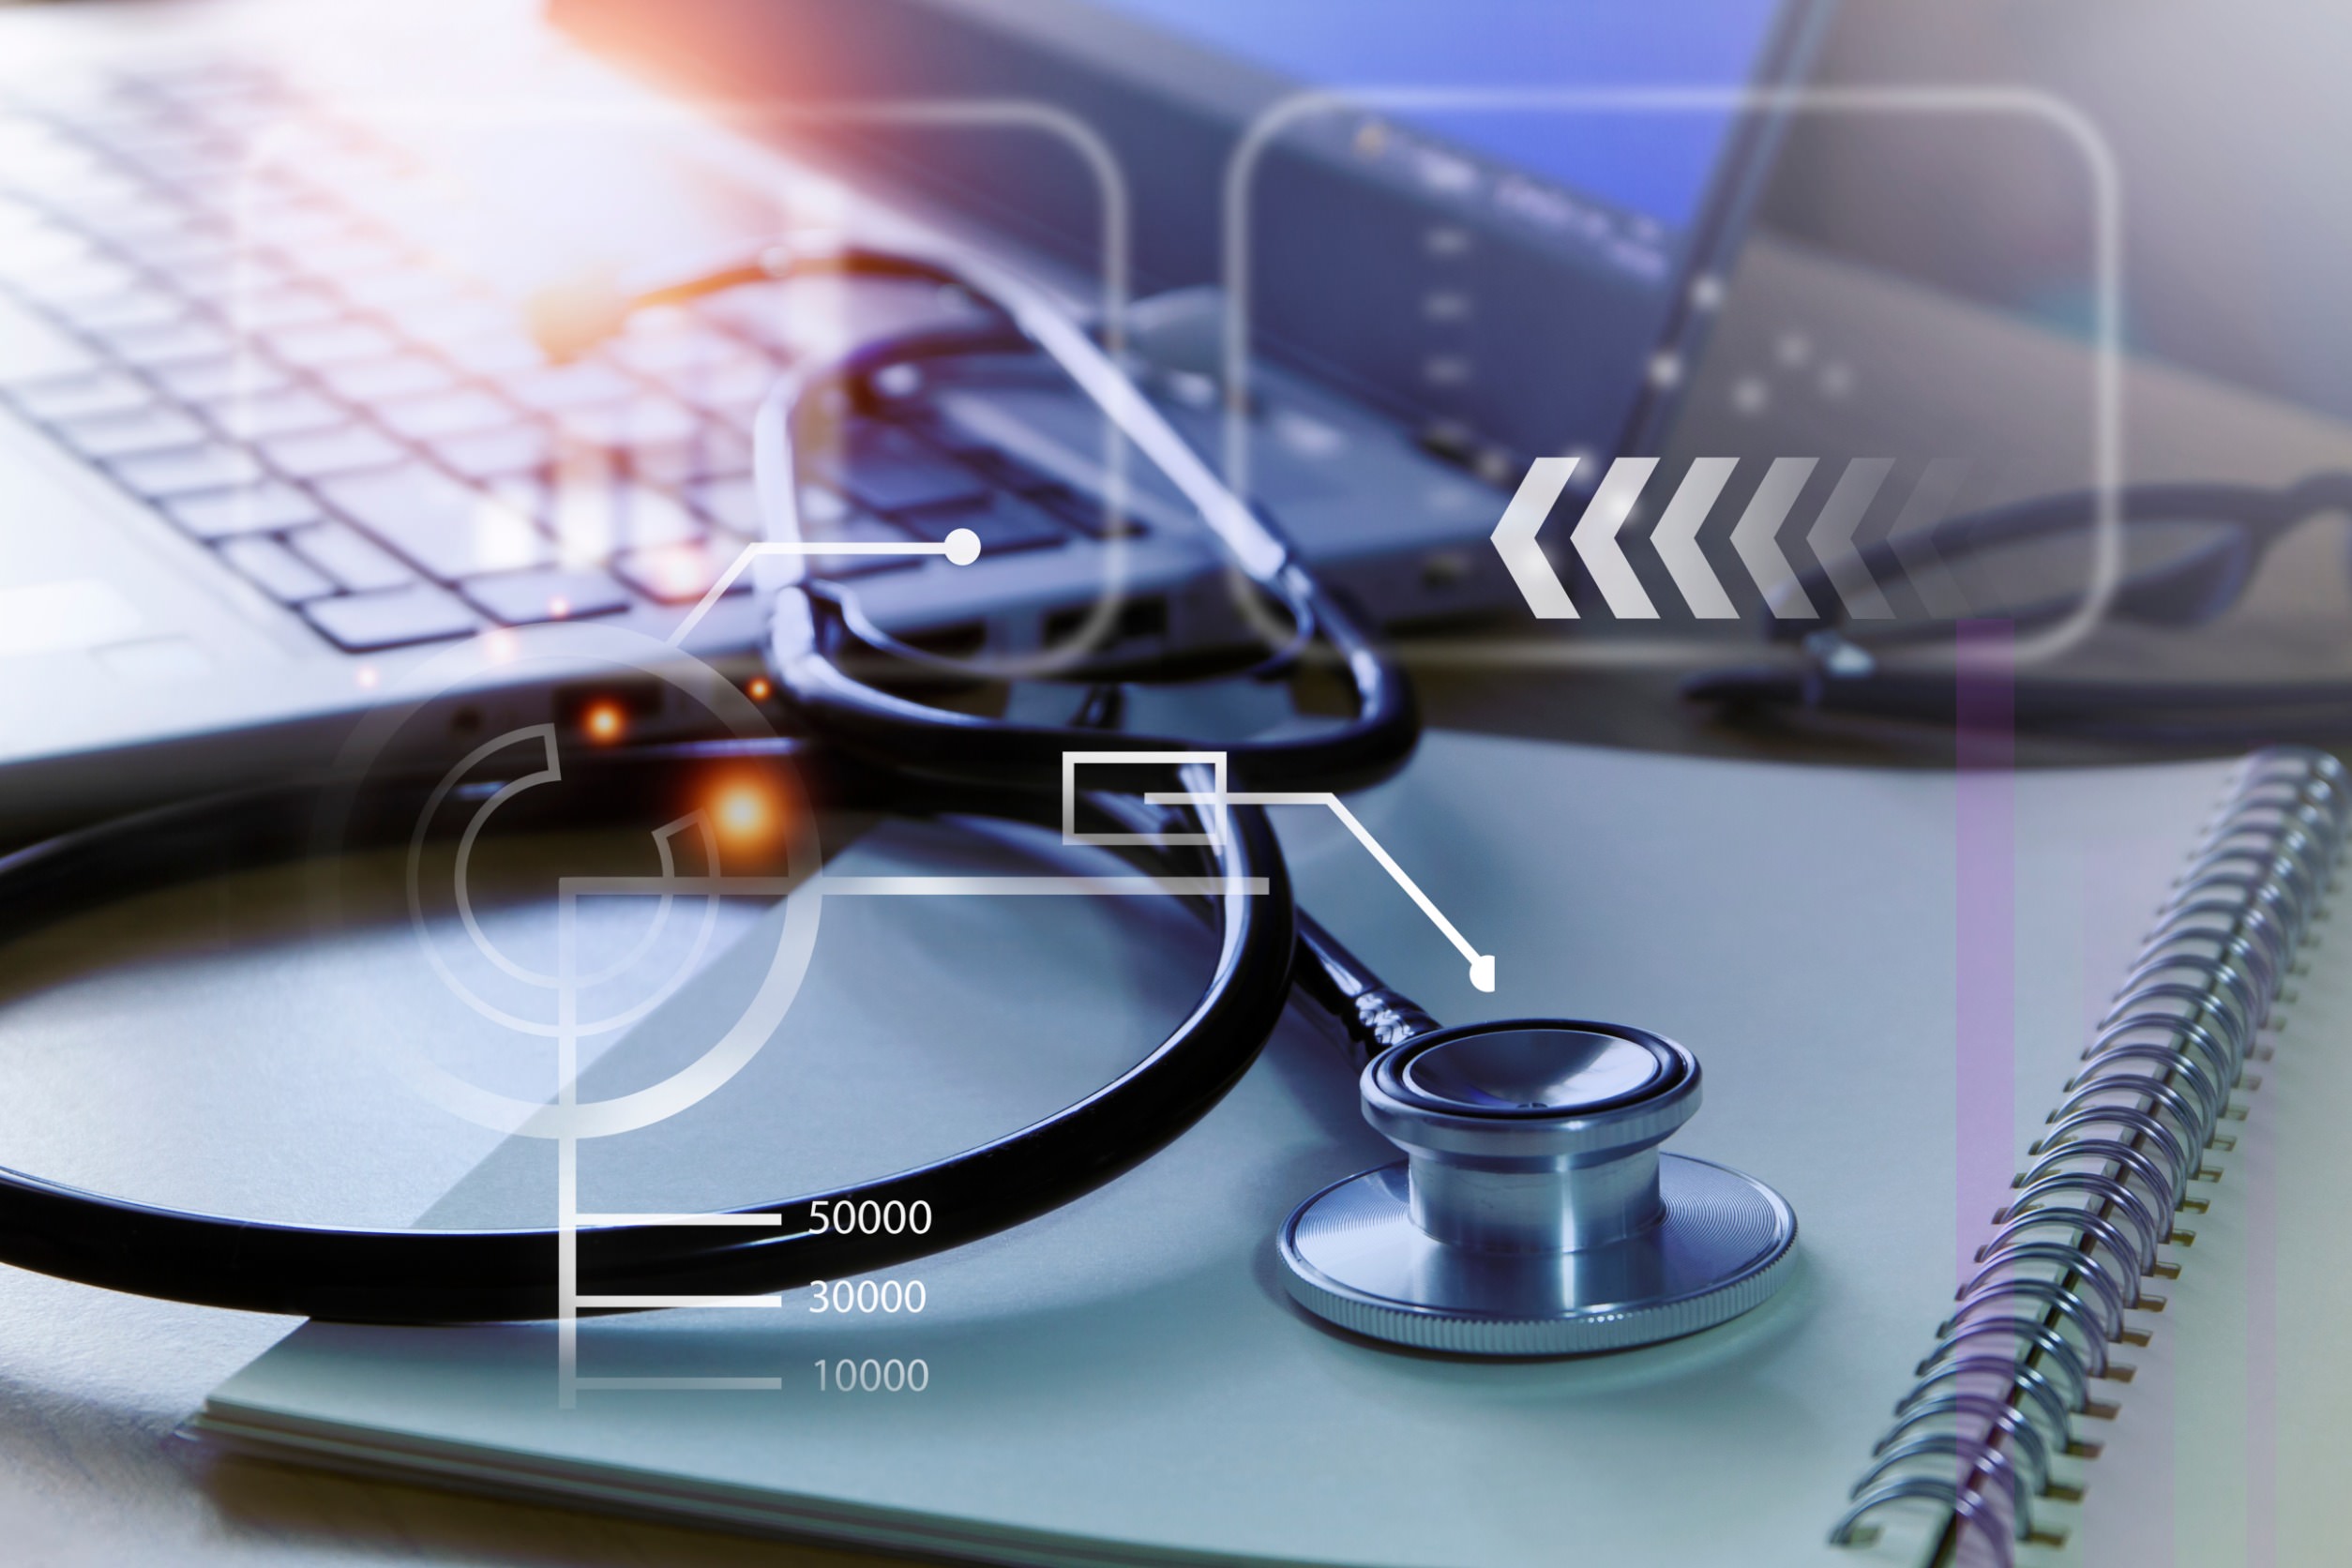 Abstract image of a stethoscope and laptop signifying healthcare innovation